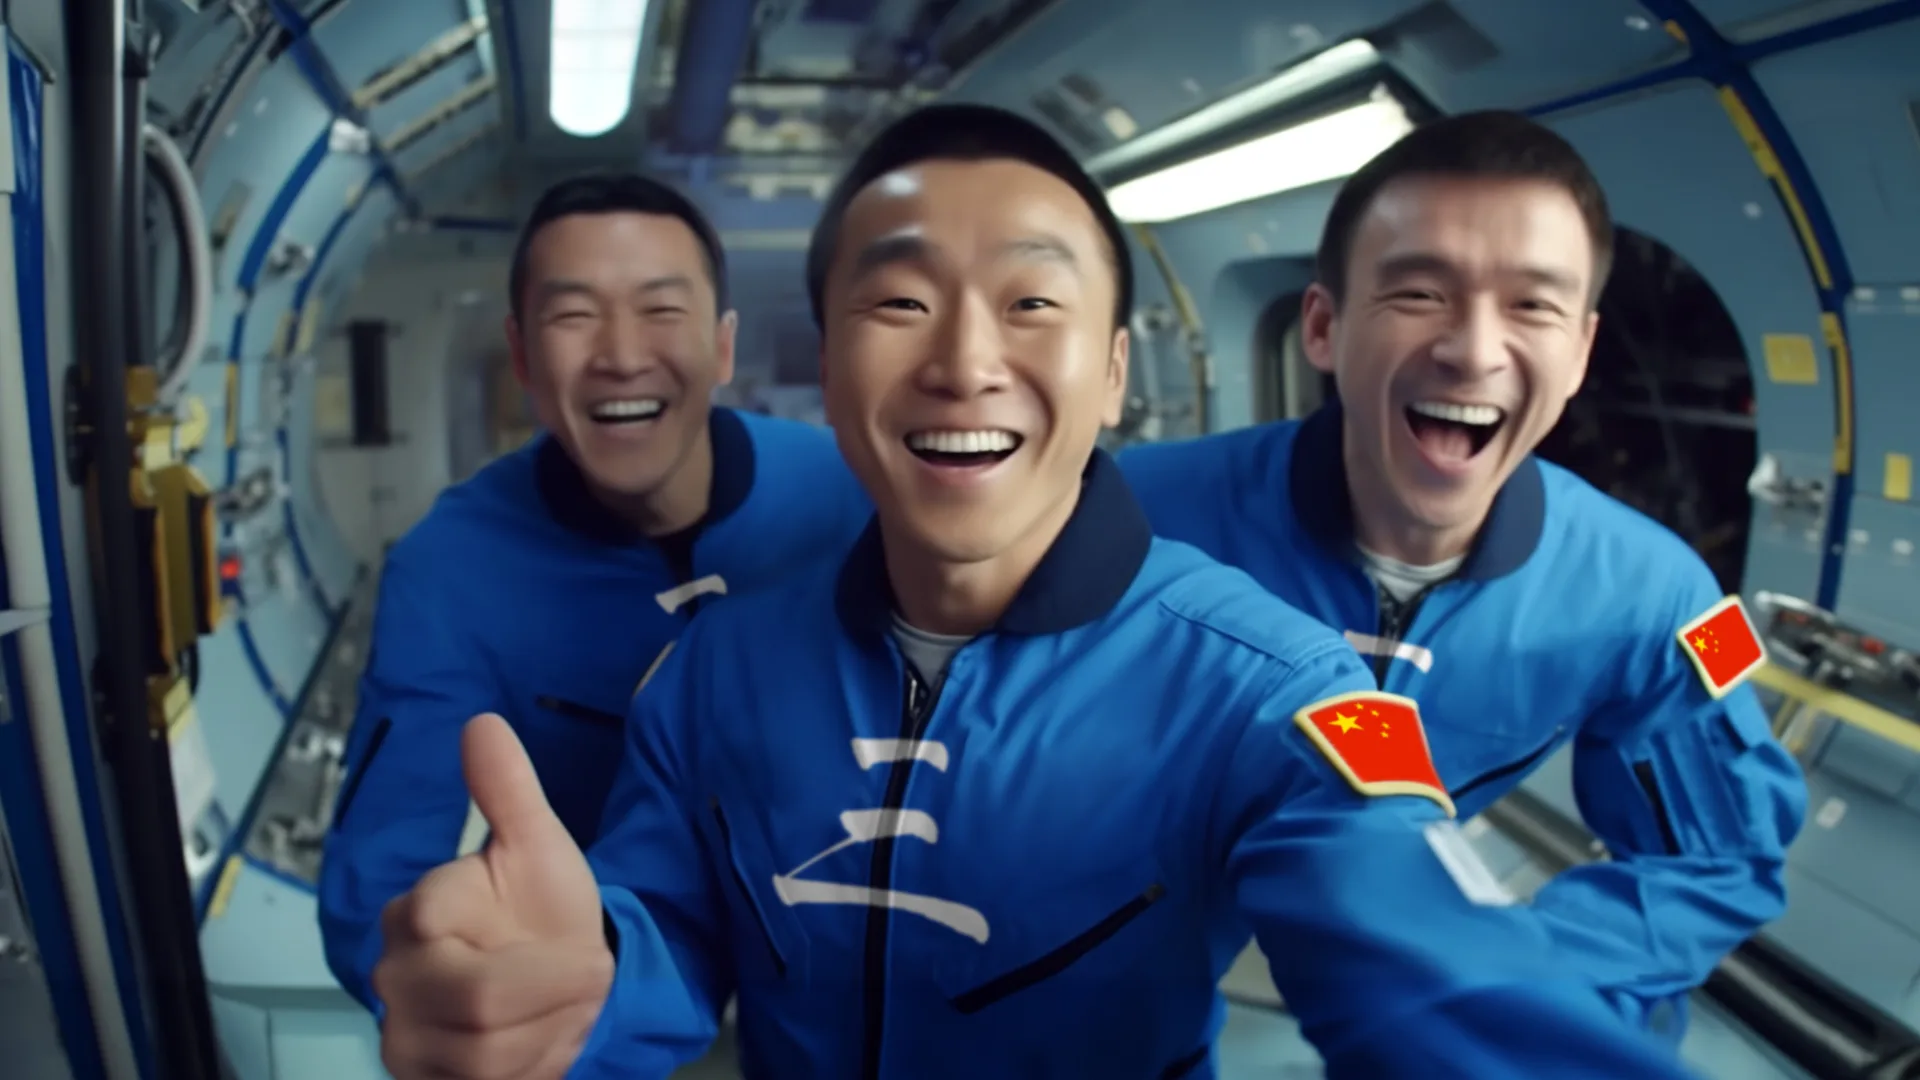 V3midjourney 3 young chinese men wearing blue boiler suits wavi a1d0dbbc 168a 4d59 8026 bfe10bd6bef2 c